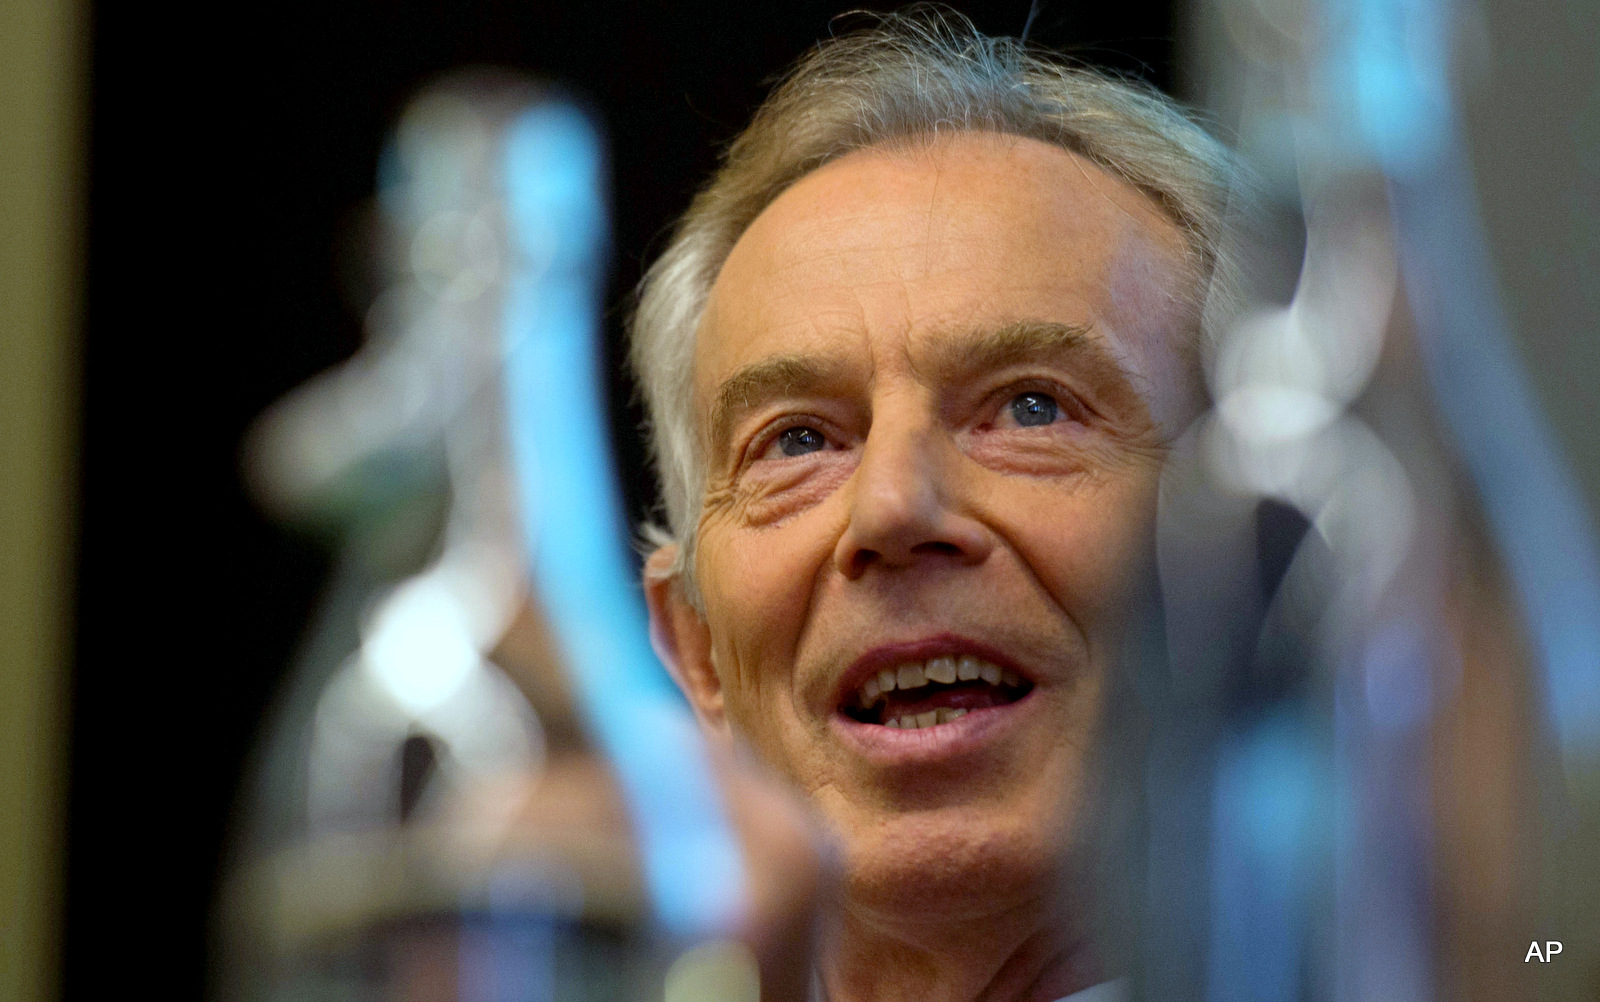 Former British Prime Minister Tony Blair takes part in a discussion on Britain in the World,  in London, Tuesday May 24, 2016, where he acknowledged the invading nations had underestimated the "forces of destabilization" that would emerge in Iraq after the toppling of dictator Saddam Hussein.  Blair said Tuesday that the Islamic State group forces will be defeated only with a ground war involving Western troops.